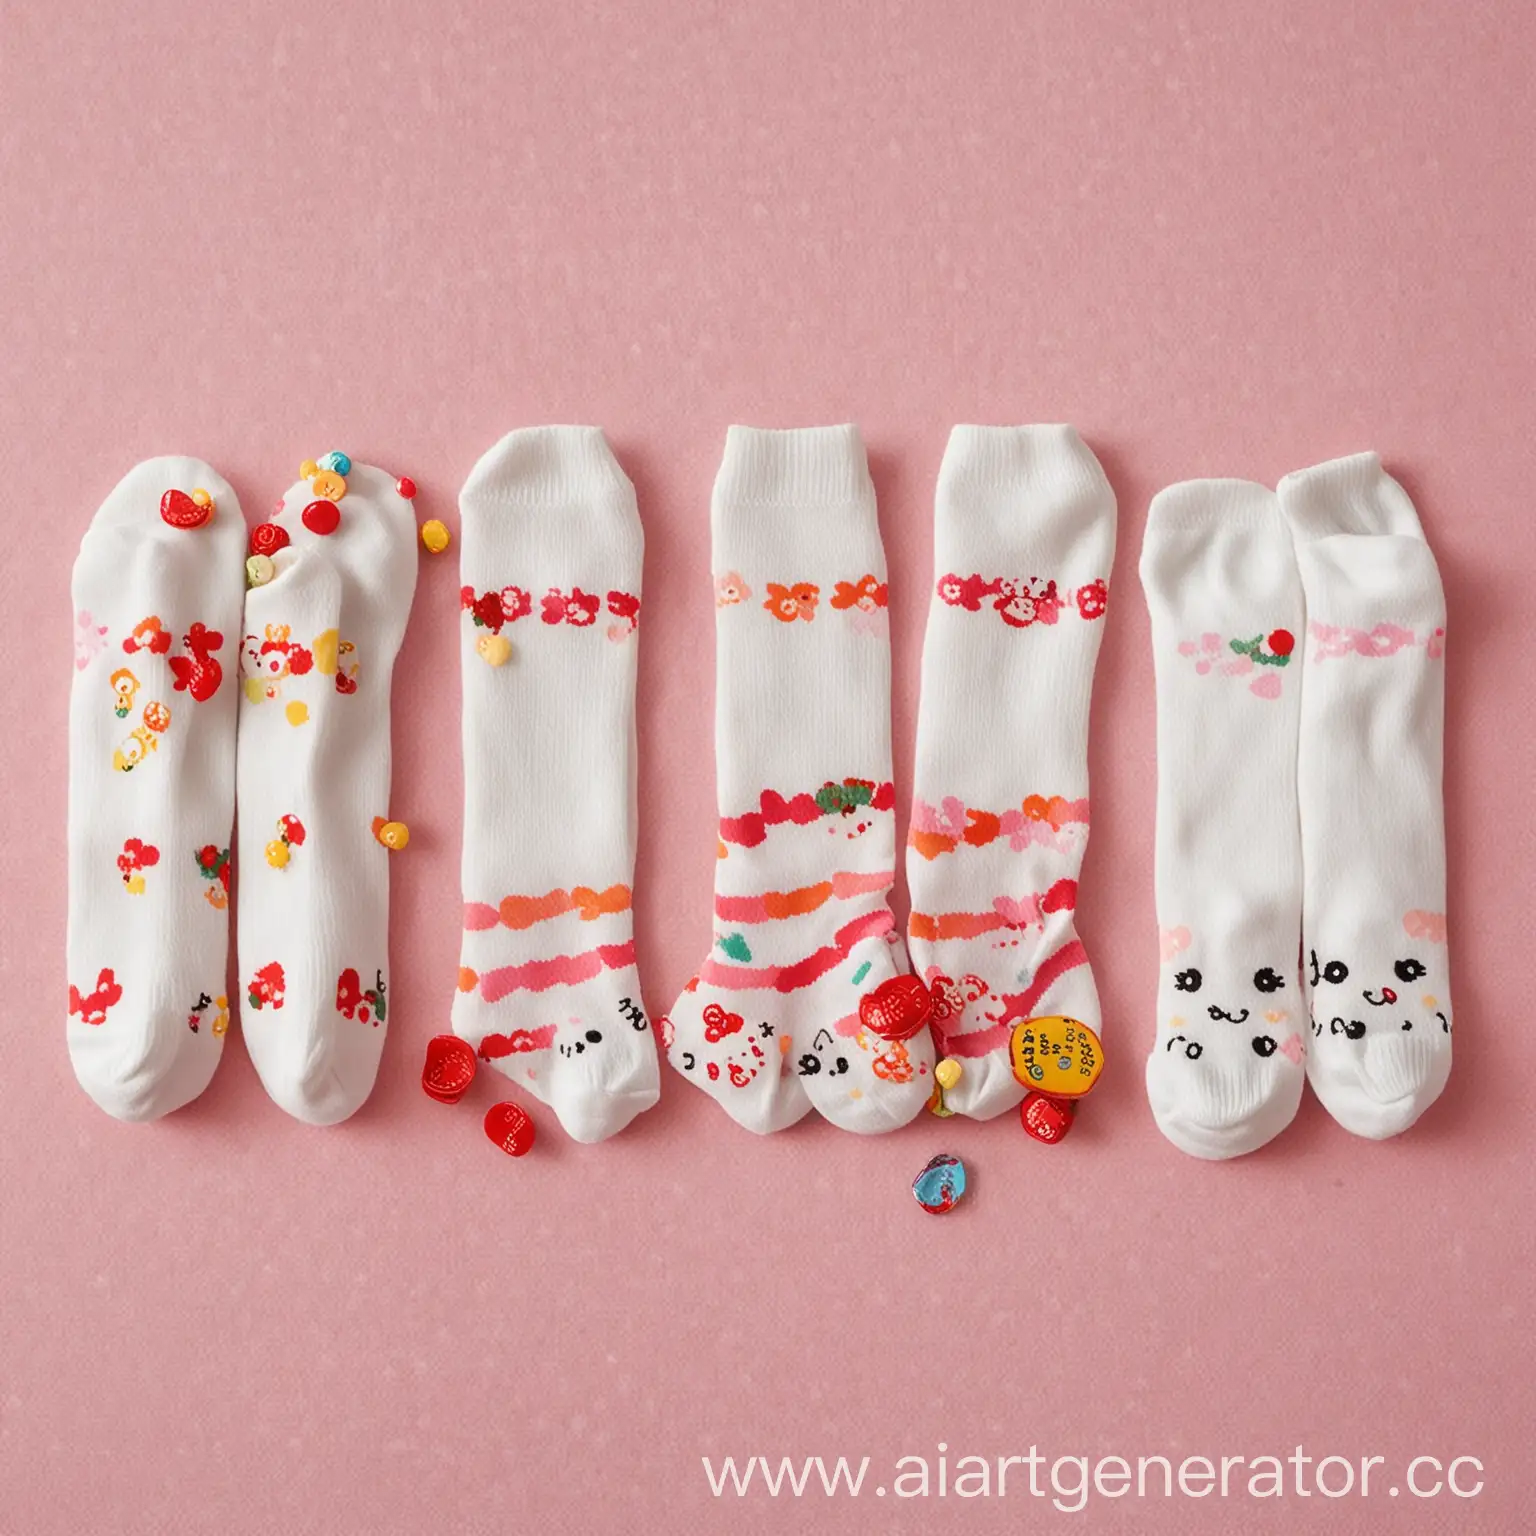 Playful-Composition-with-Hello-Kitty-Socks-Chupa-Chups-Candy-and-Toy-Horse